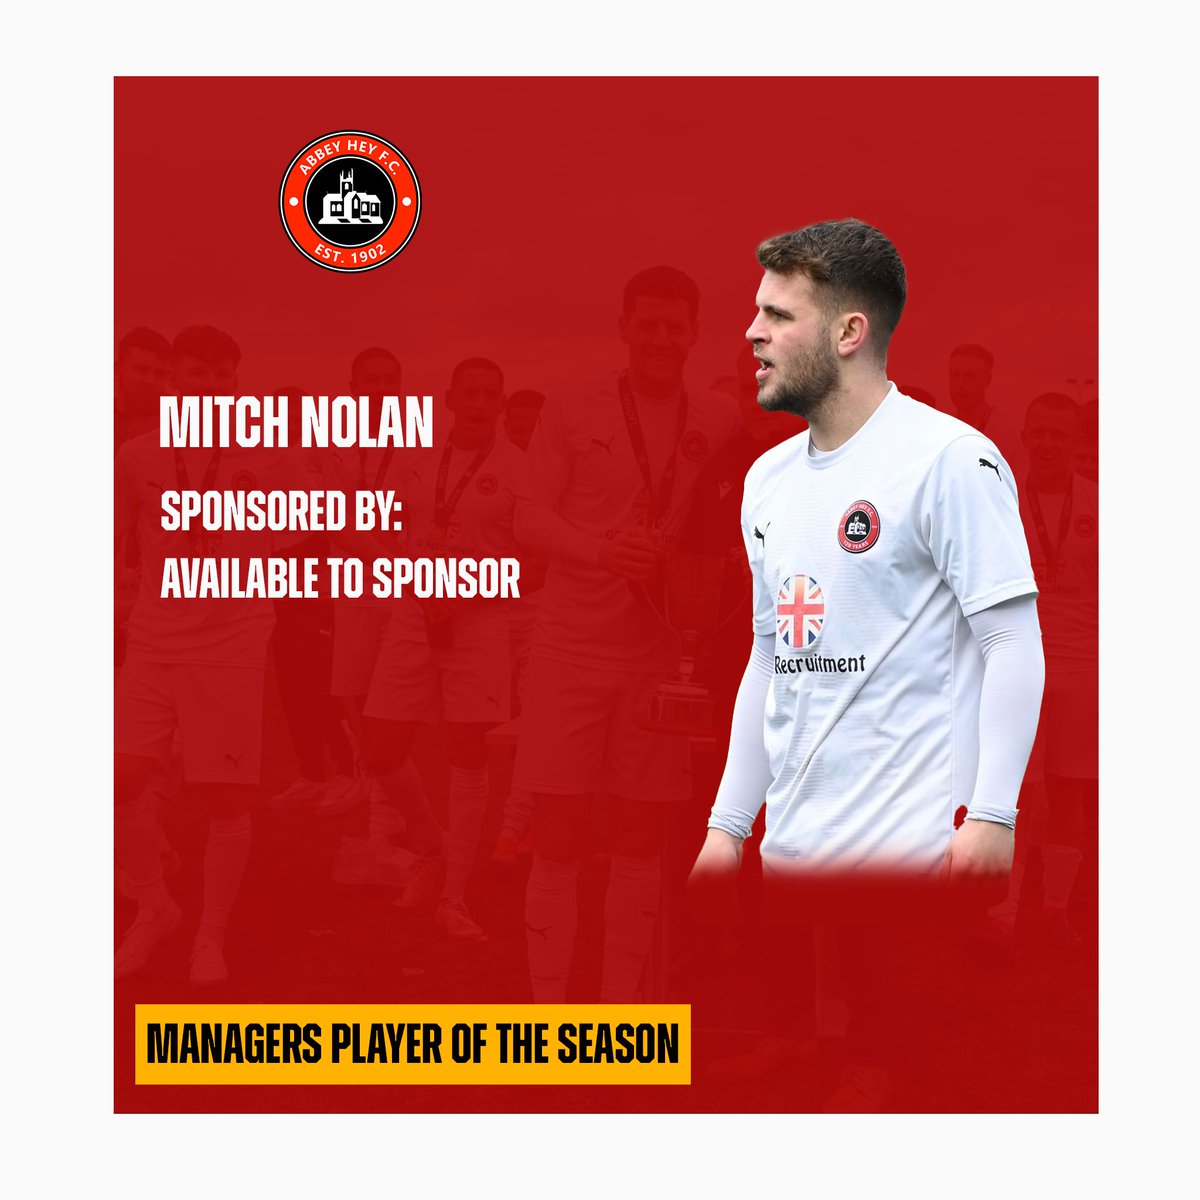 Congrats to Mitch Nolan, awarded Manager's Player Of The Season 👏 #uptheabbey